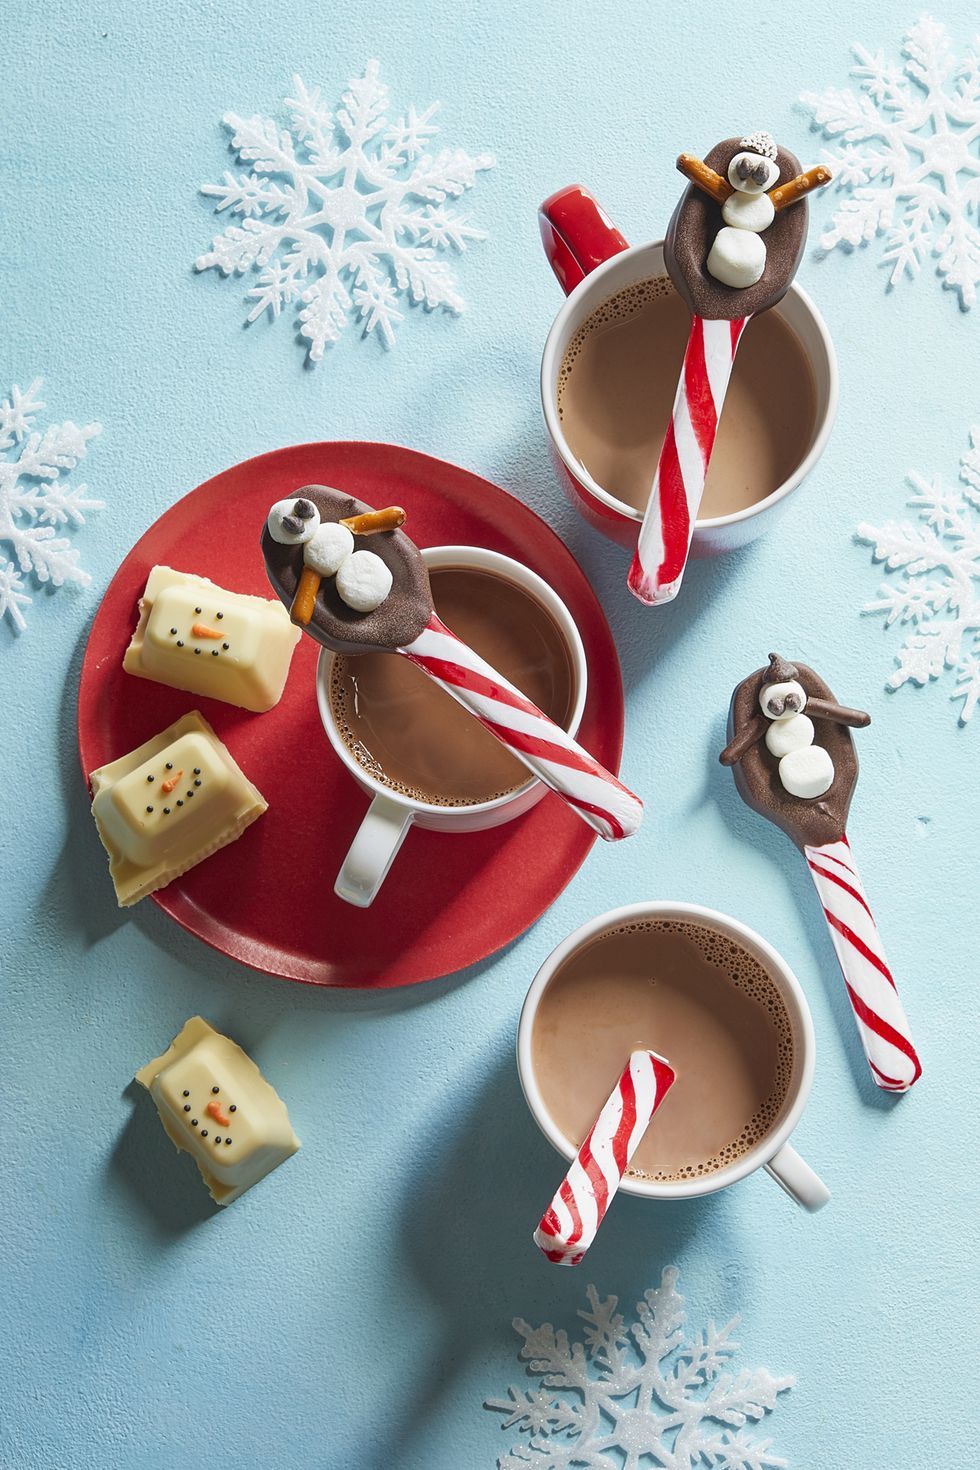 tempting chocolate chip recipes - snowman spoons